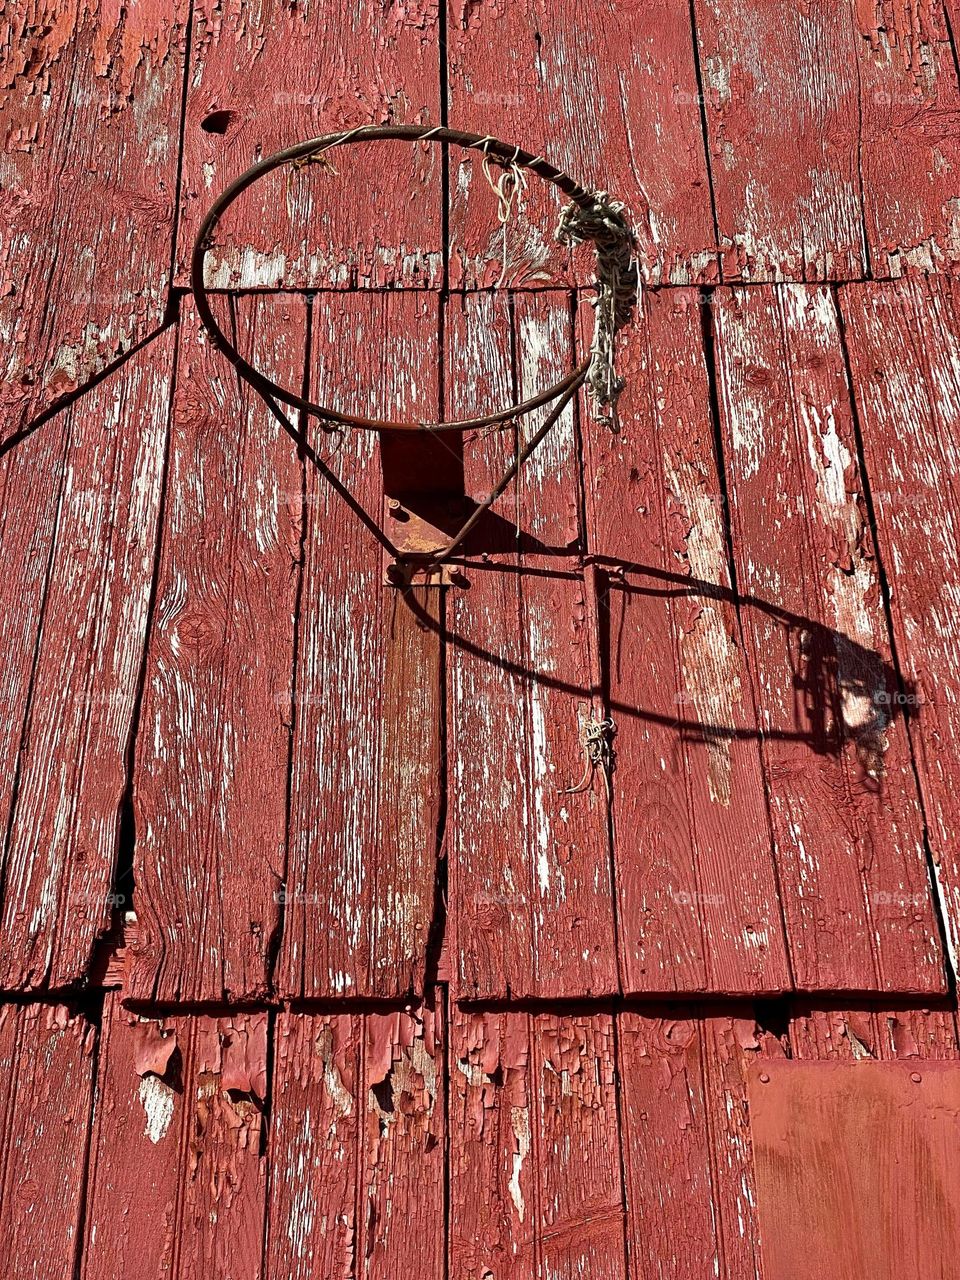 An old basketball hoop on the side of a red barn